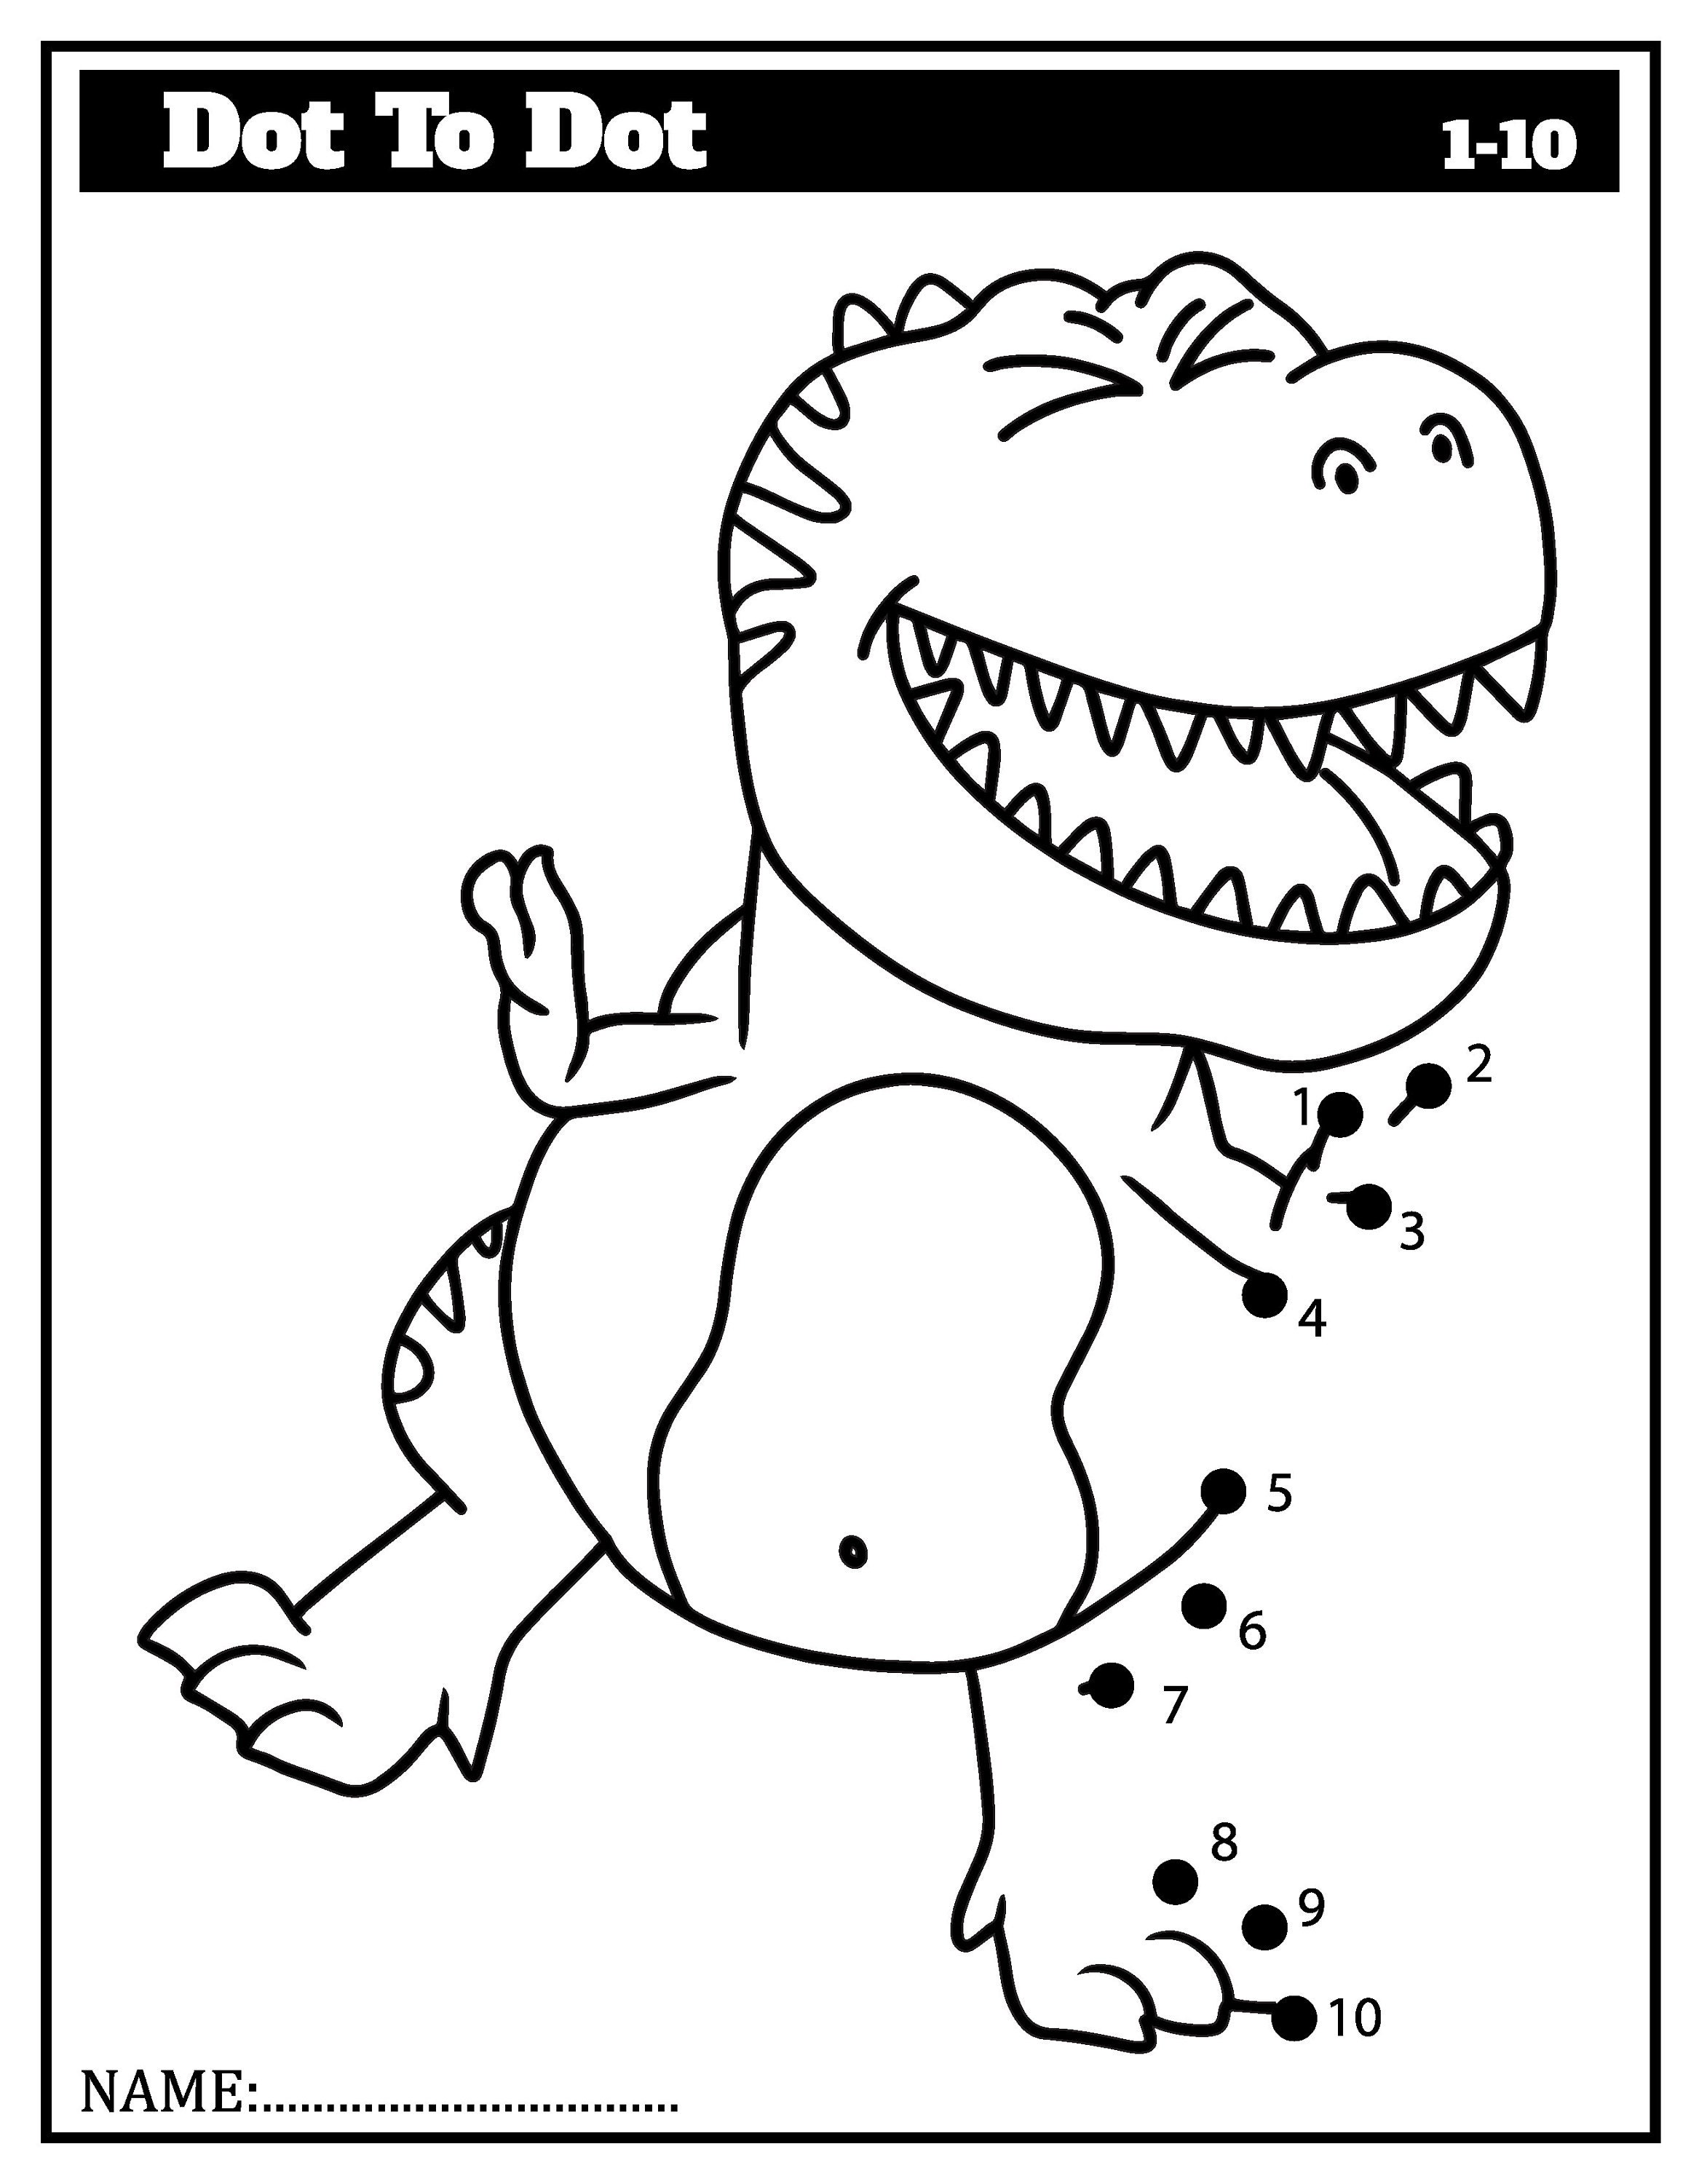 dinosaur-dot-to-dot-10-coloring-pages-for-kids-etsy-uk